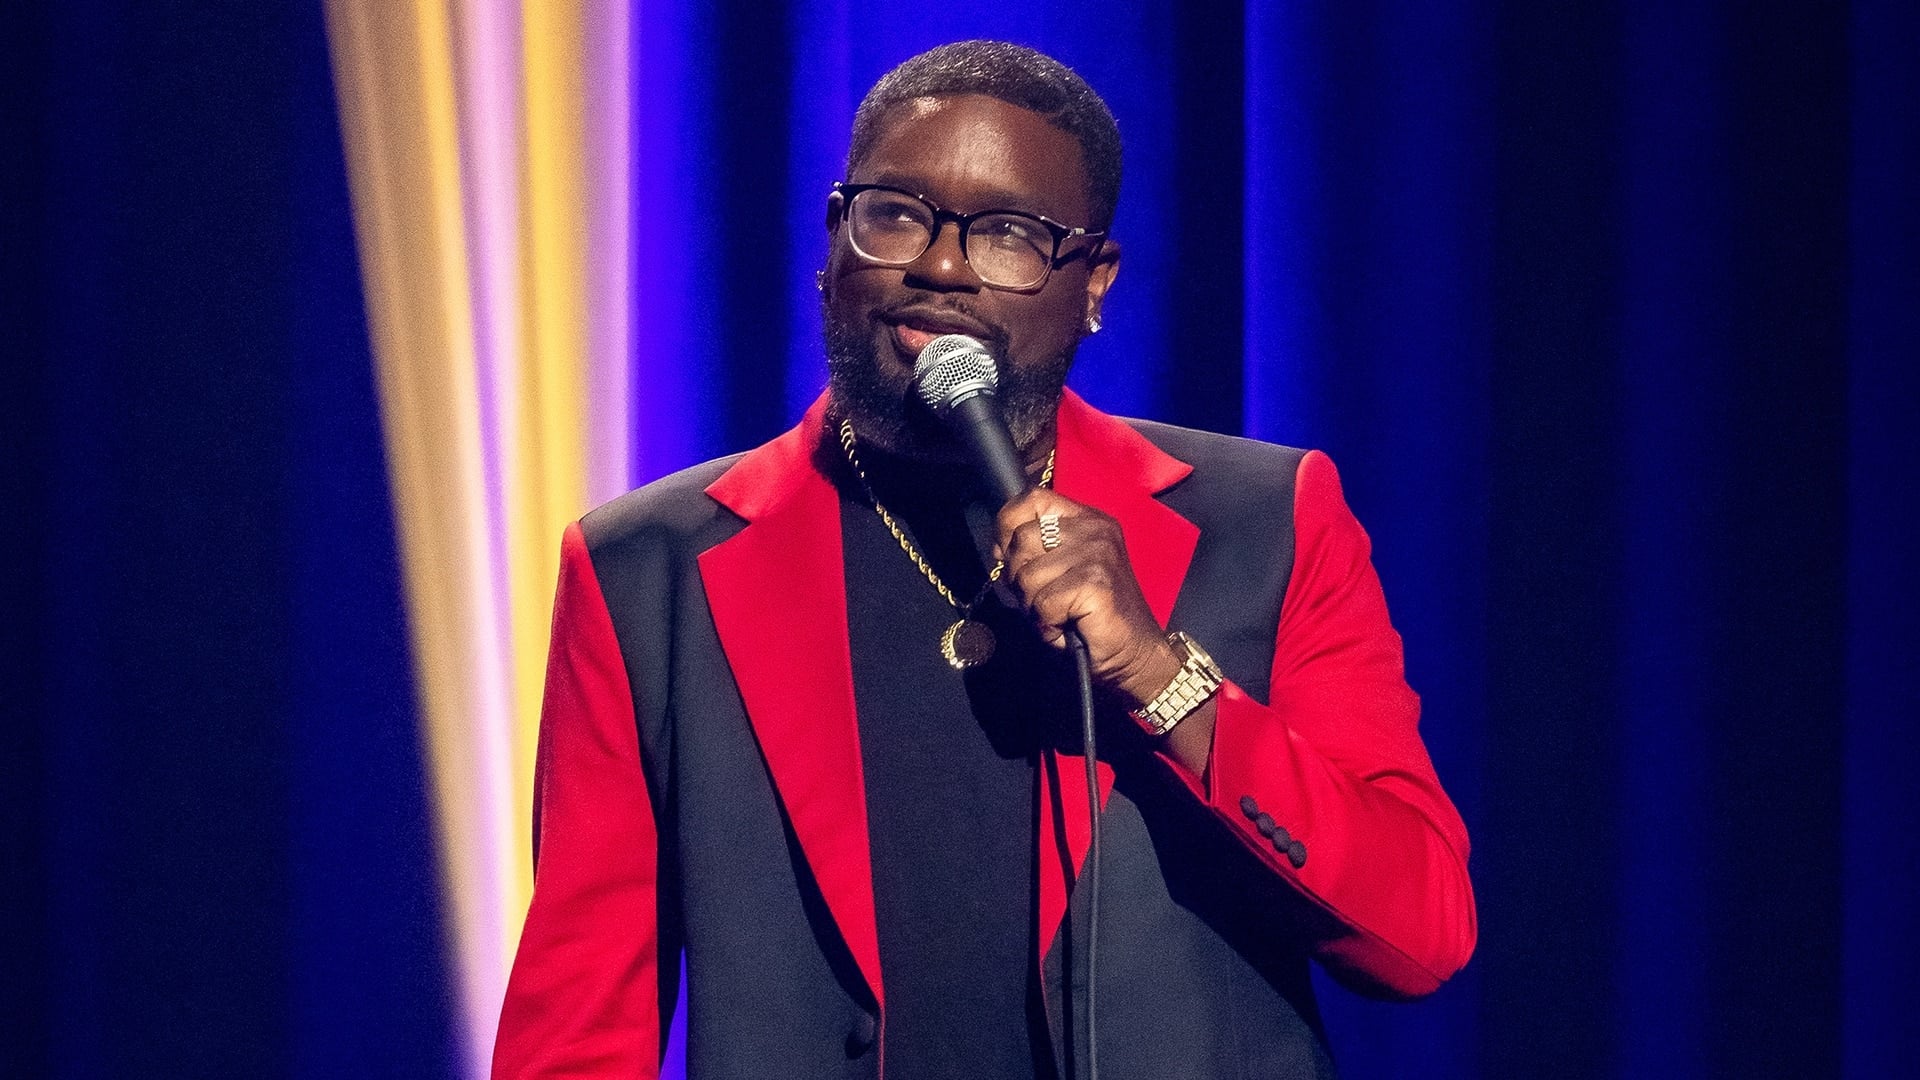 Lil Rel Howery: I Said It. Y’all Thinking It. 2022 Soap2Day